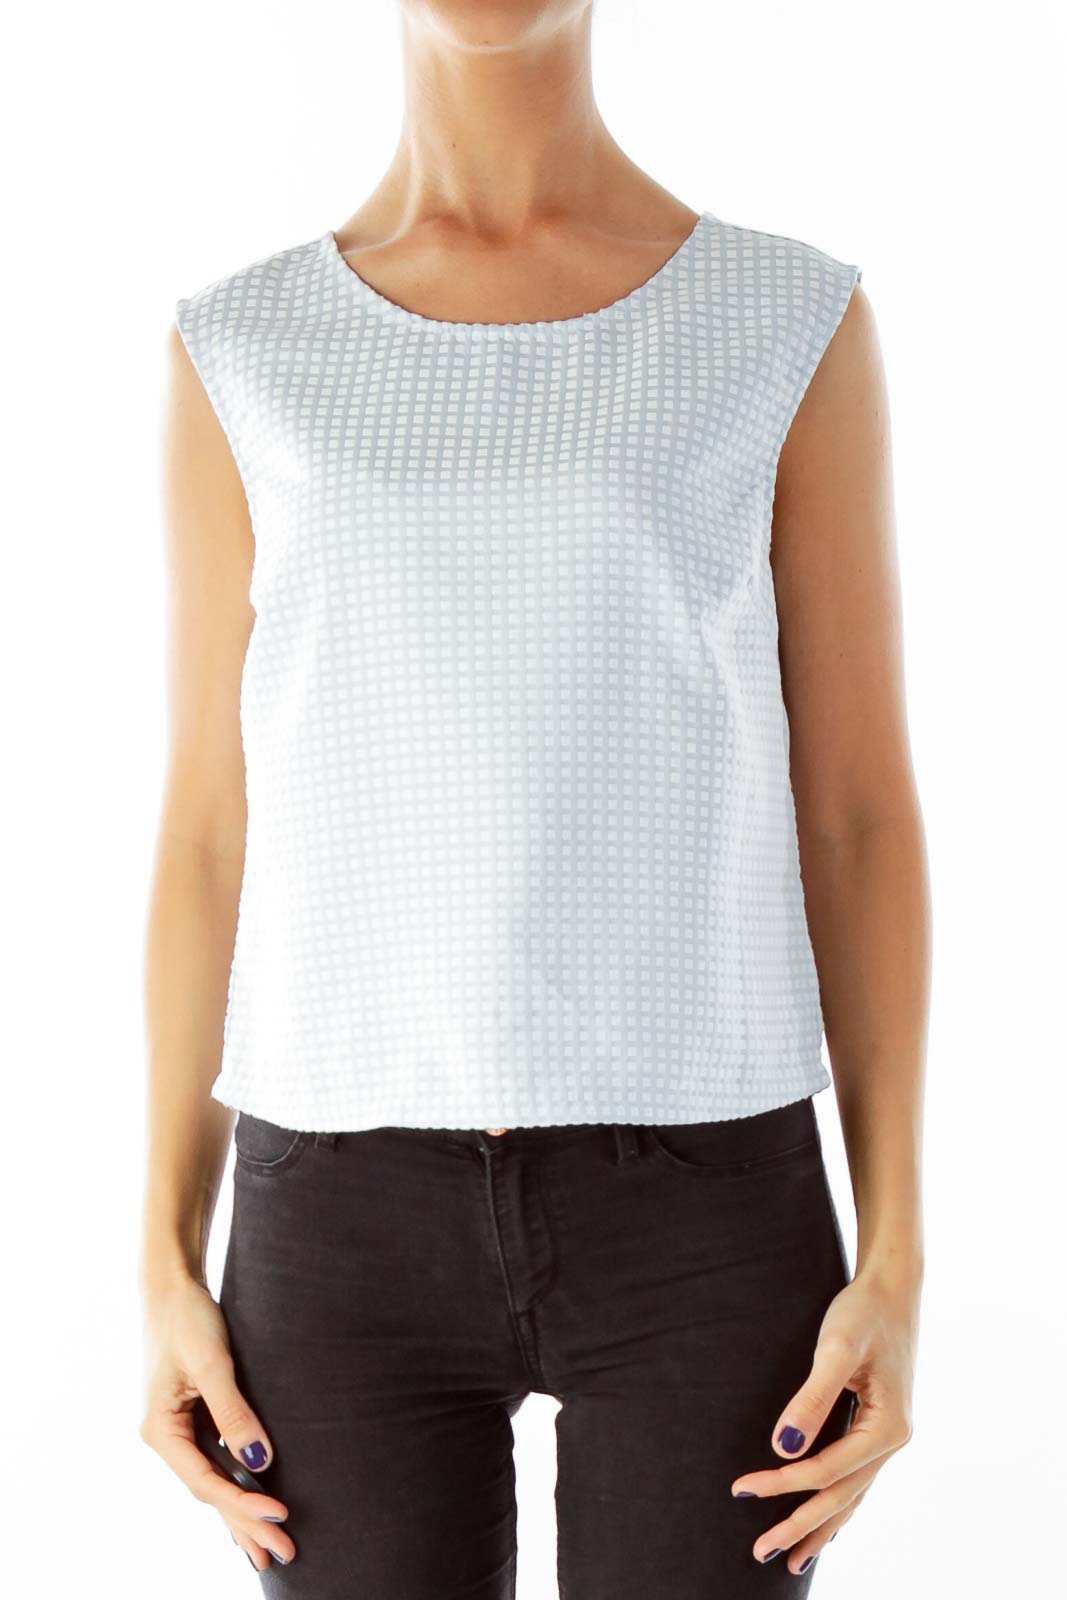 Blue Checkered Sleeveless Blouse Front